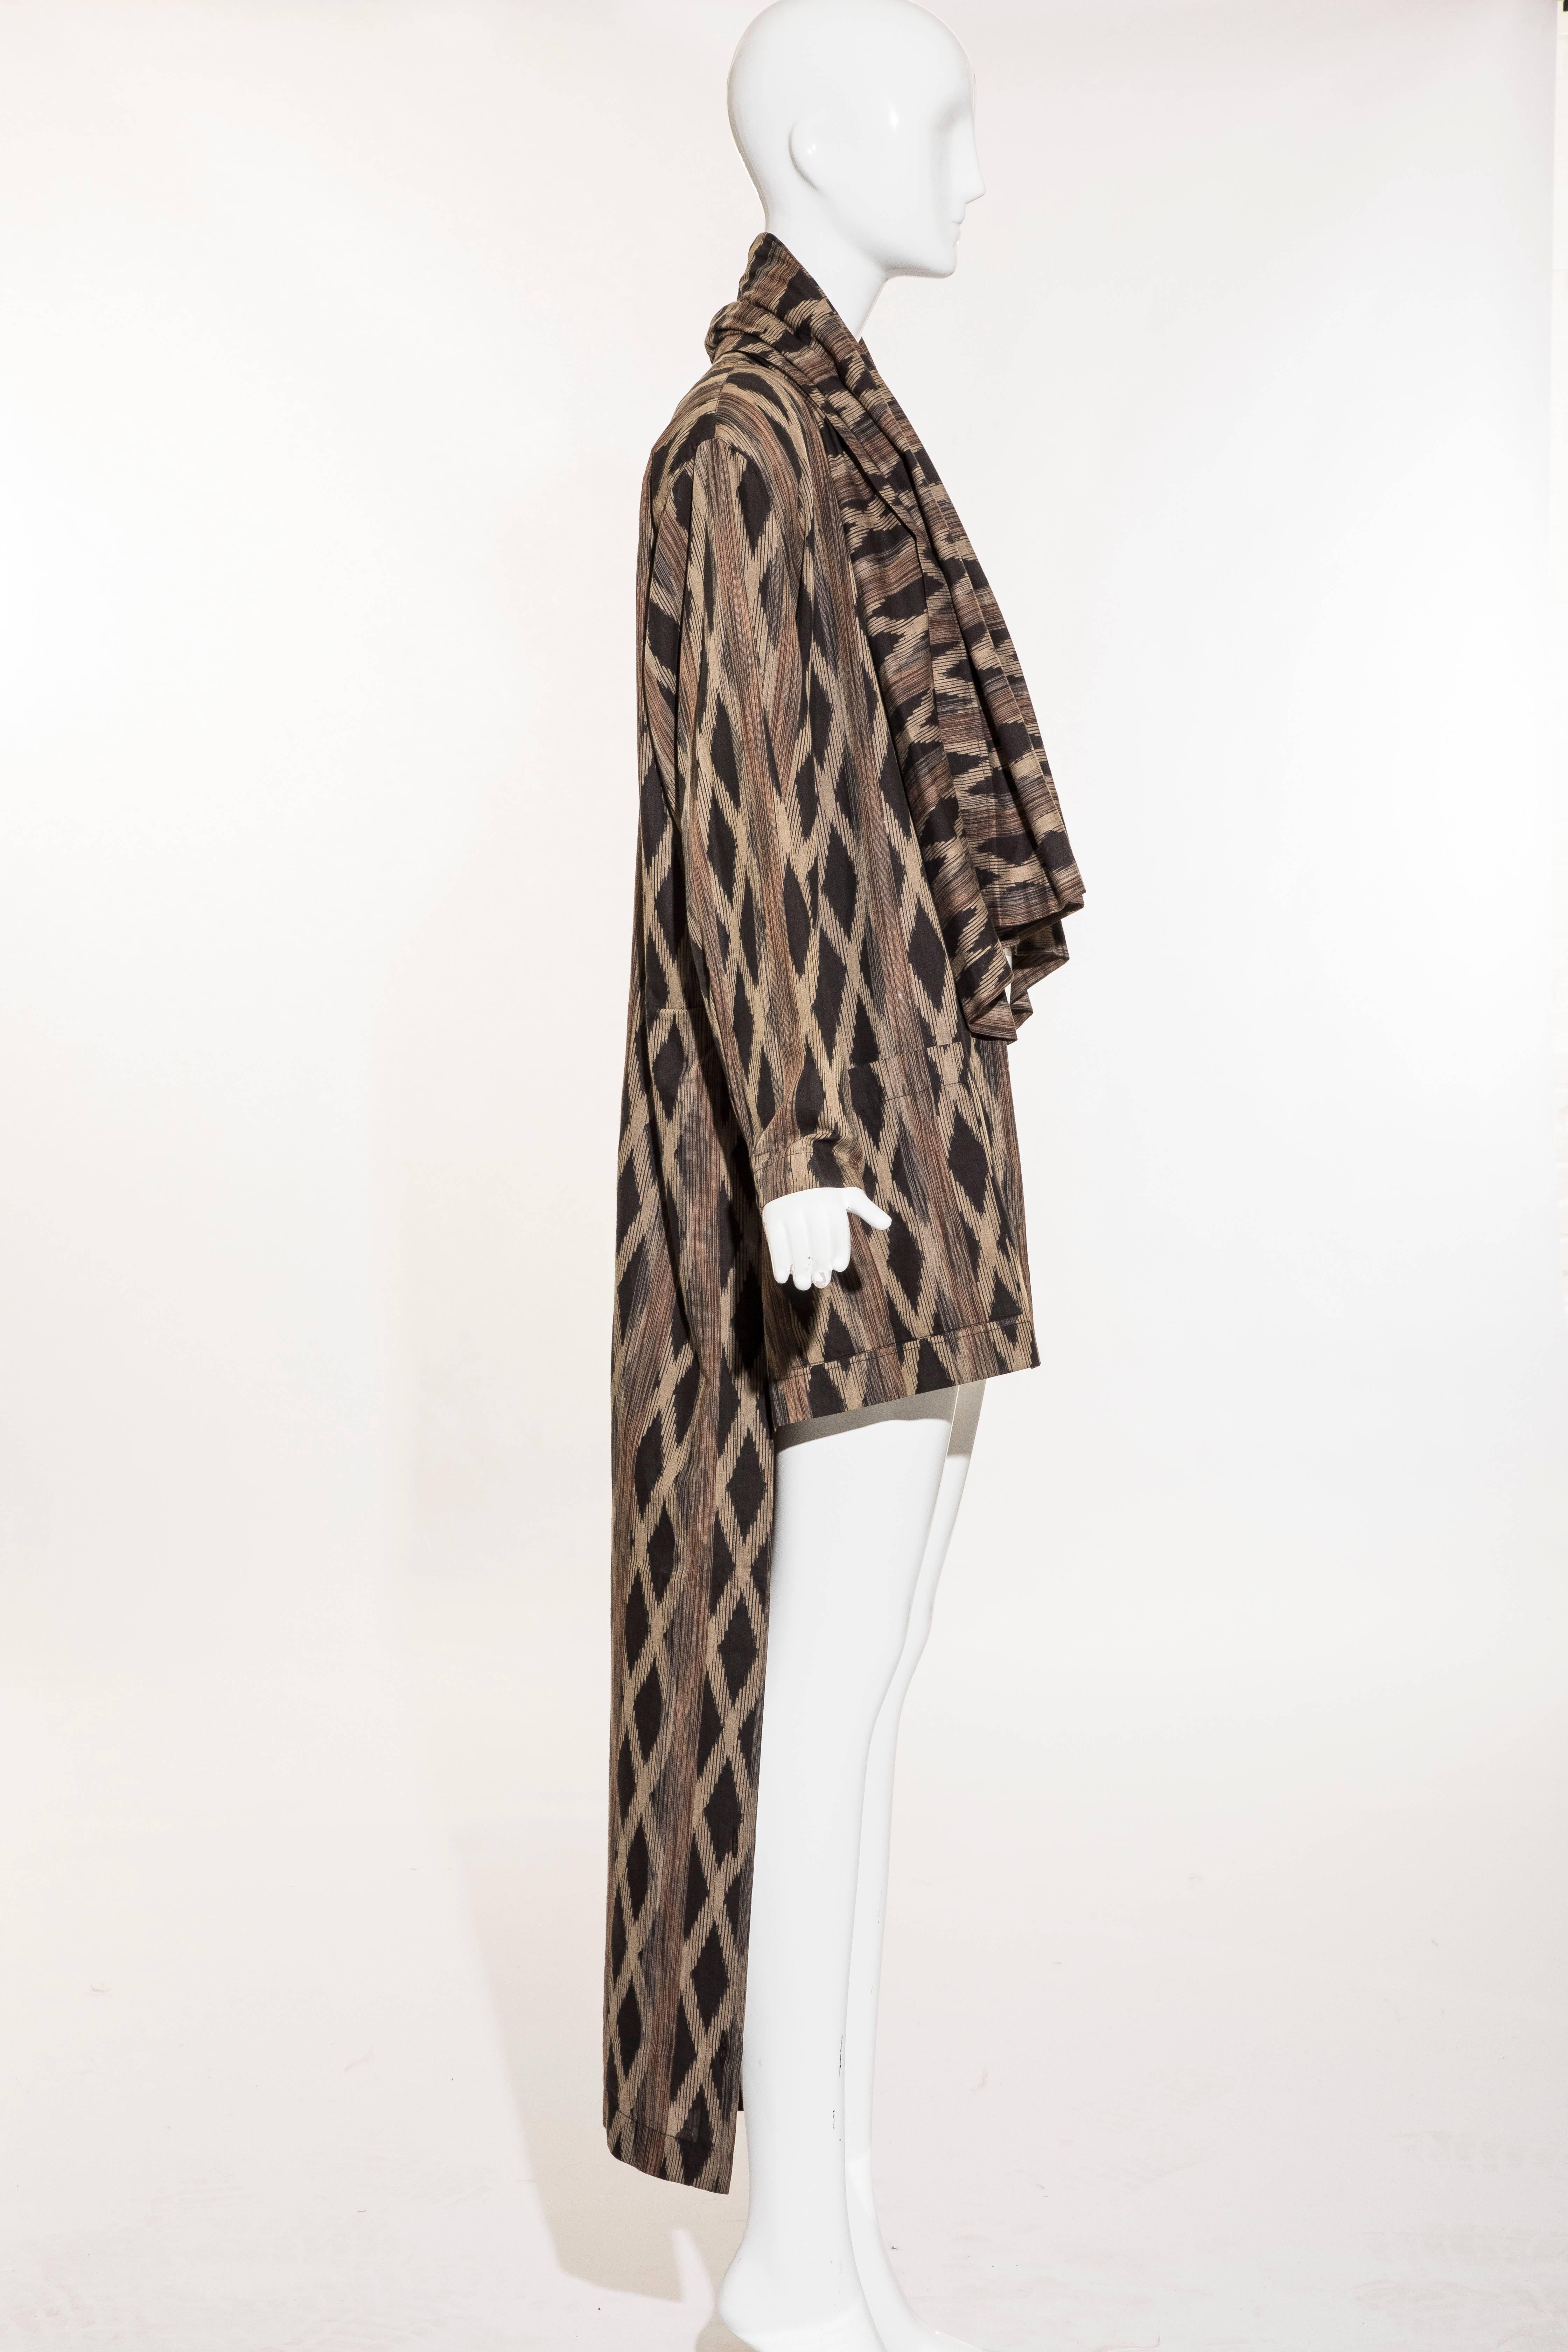 Issey Miyake Cotton Silk Lattice Weave Jacket Duster Cardigan, Fall 1986 For Sale 6